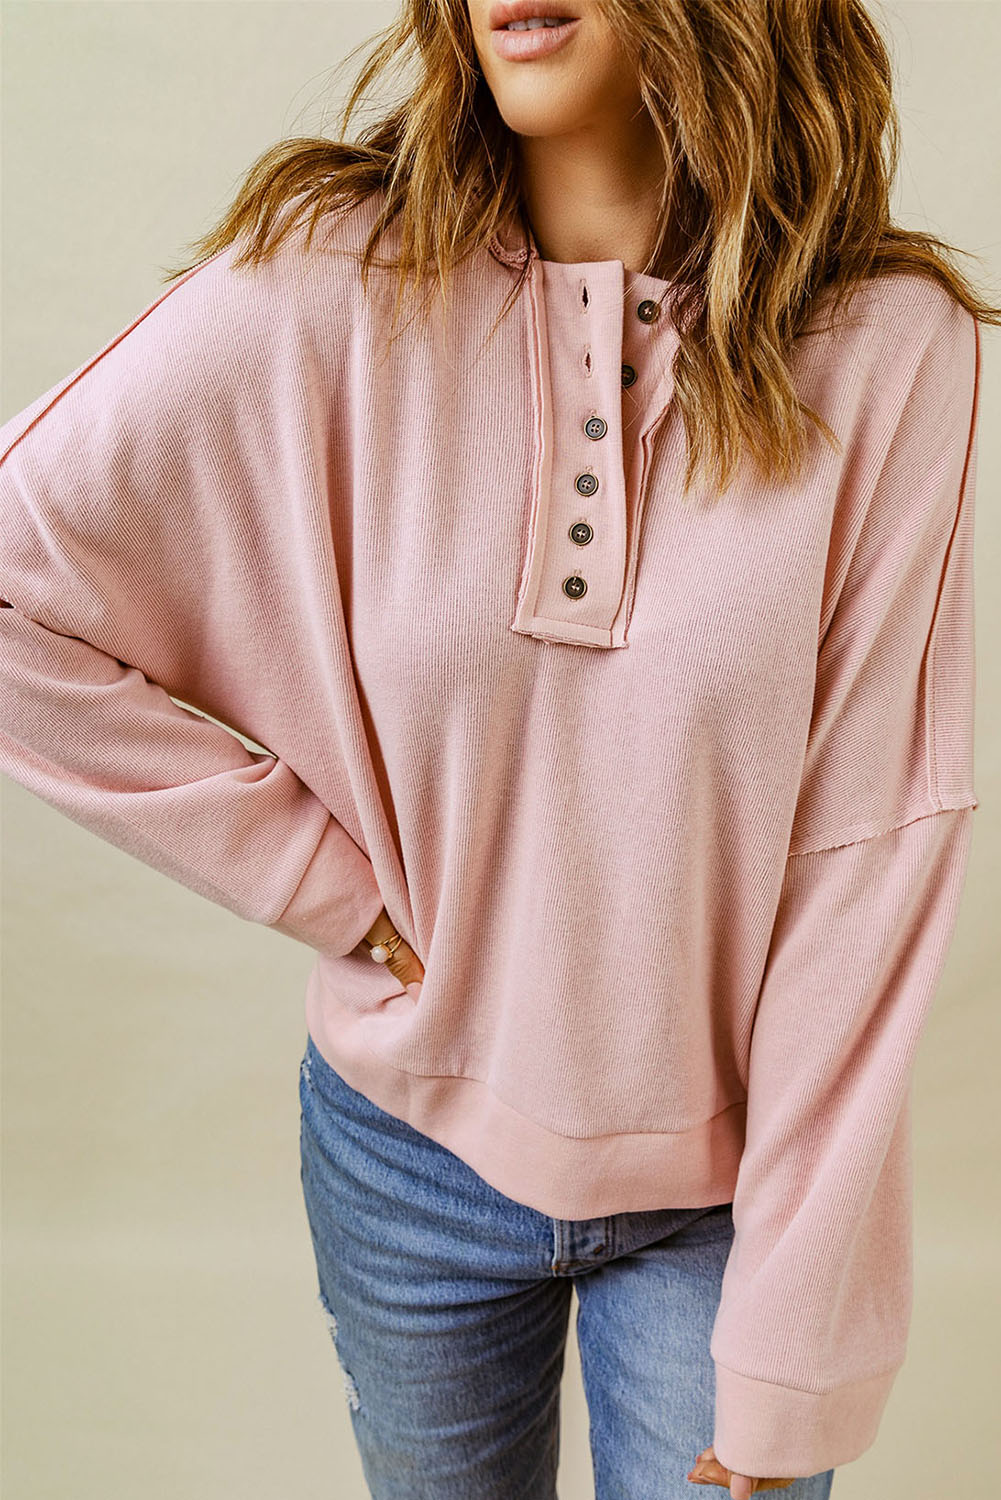 Quarter-Button Exposed Seam Dropped Shoulder Hoodie - Pink / S - Women’s Clothing & Accessories - Shirts & Tops - 2